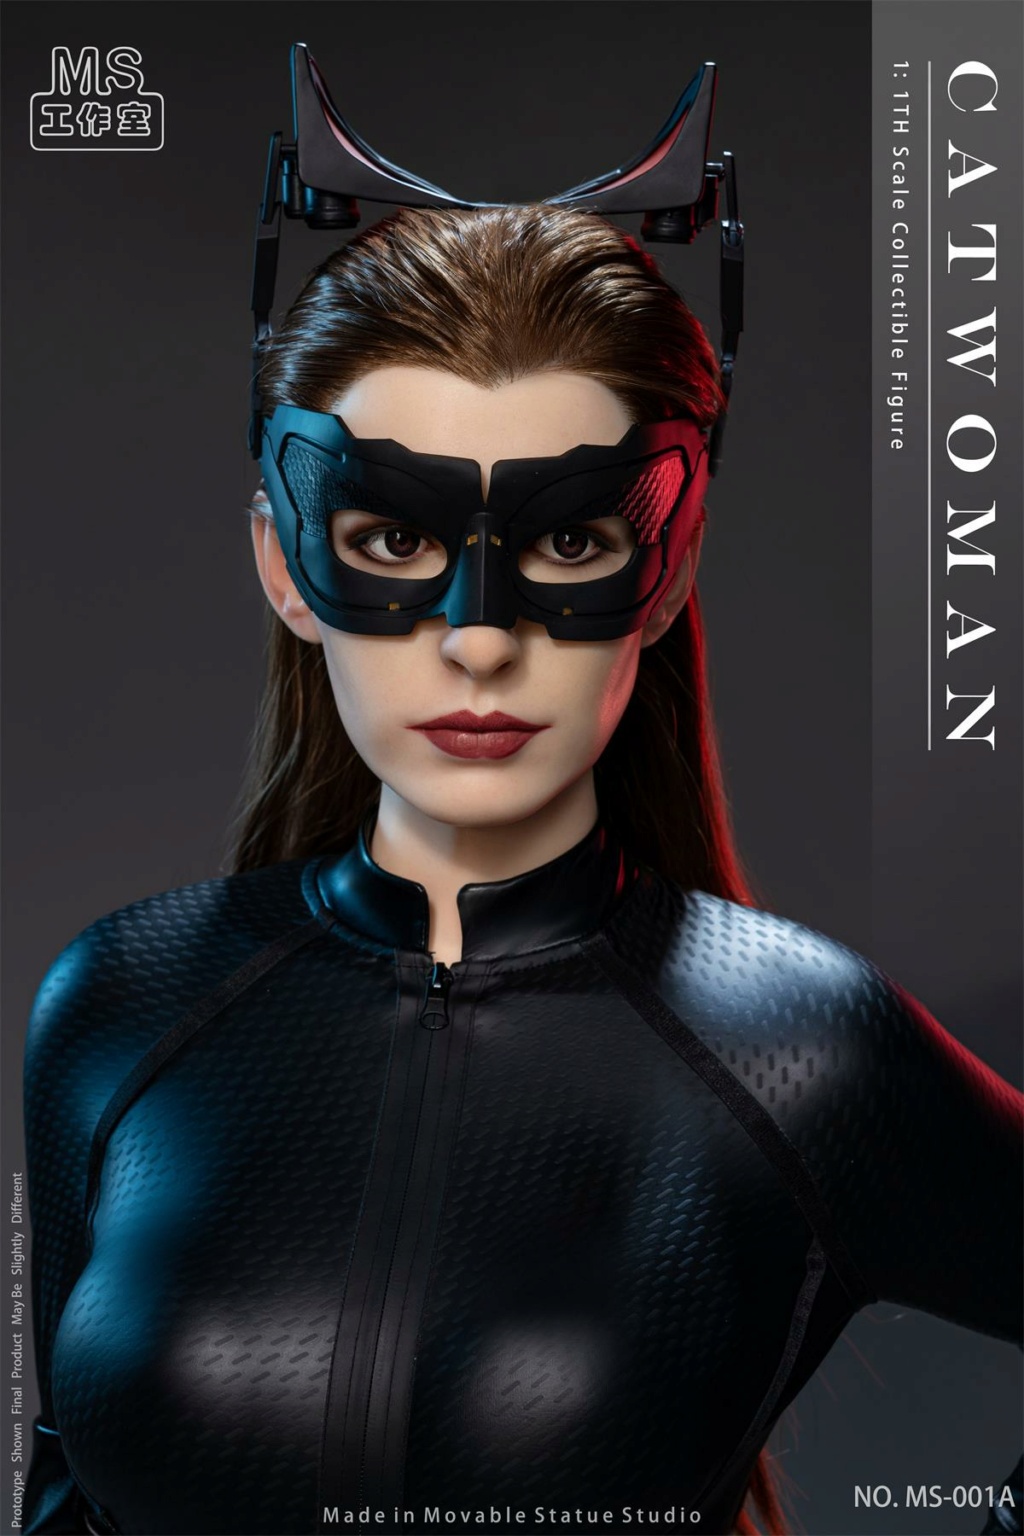 NEW PRODUCT: MS Studio: Catwoman Movie Version 1/1 Proportion Catwoman Cherished Movable Figure “ Grand ” Age MS-001A 2182